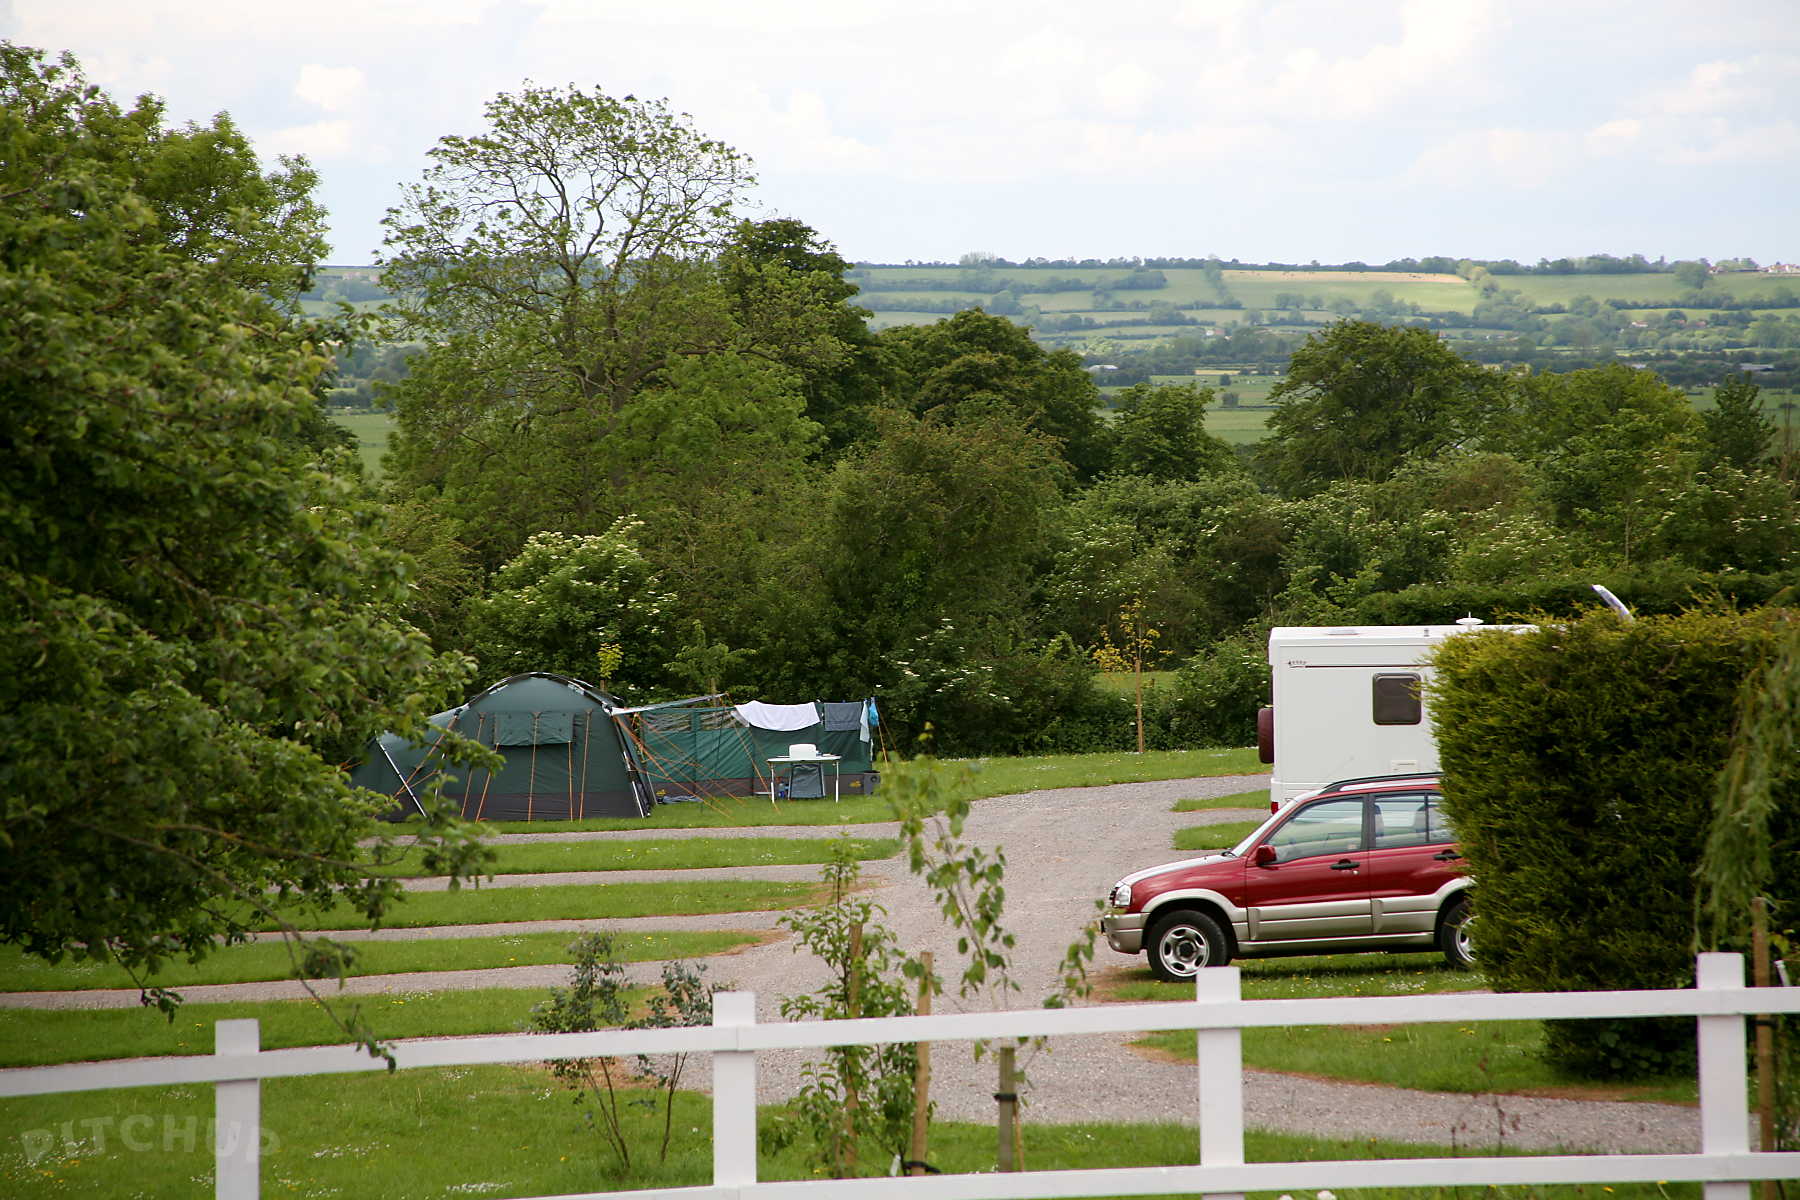 Camping and caravanning at our campsite in Cheddar